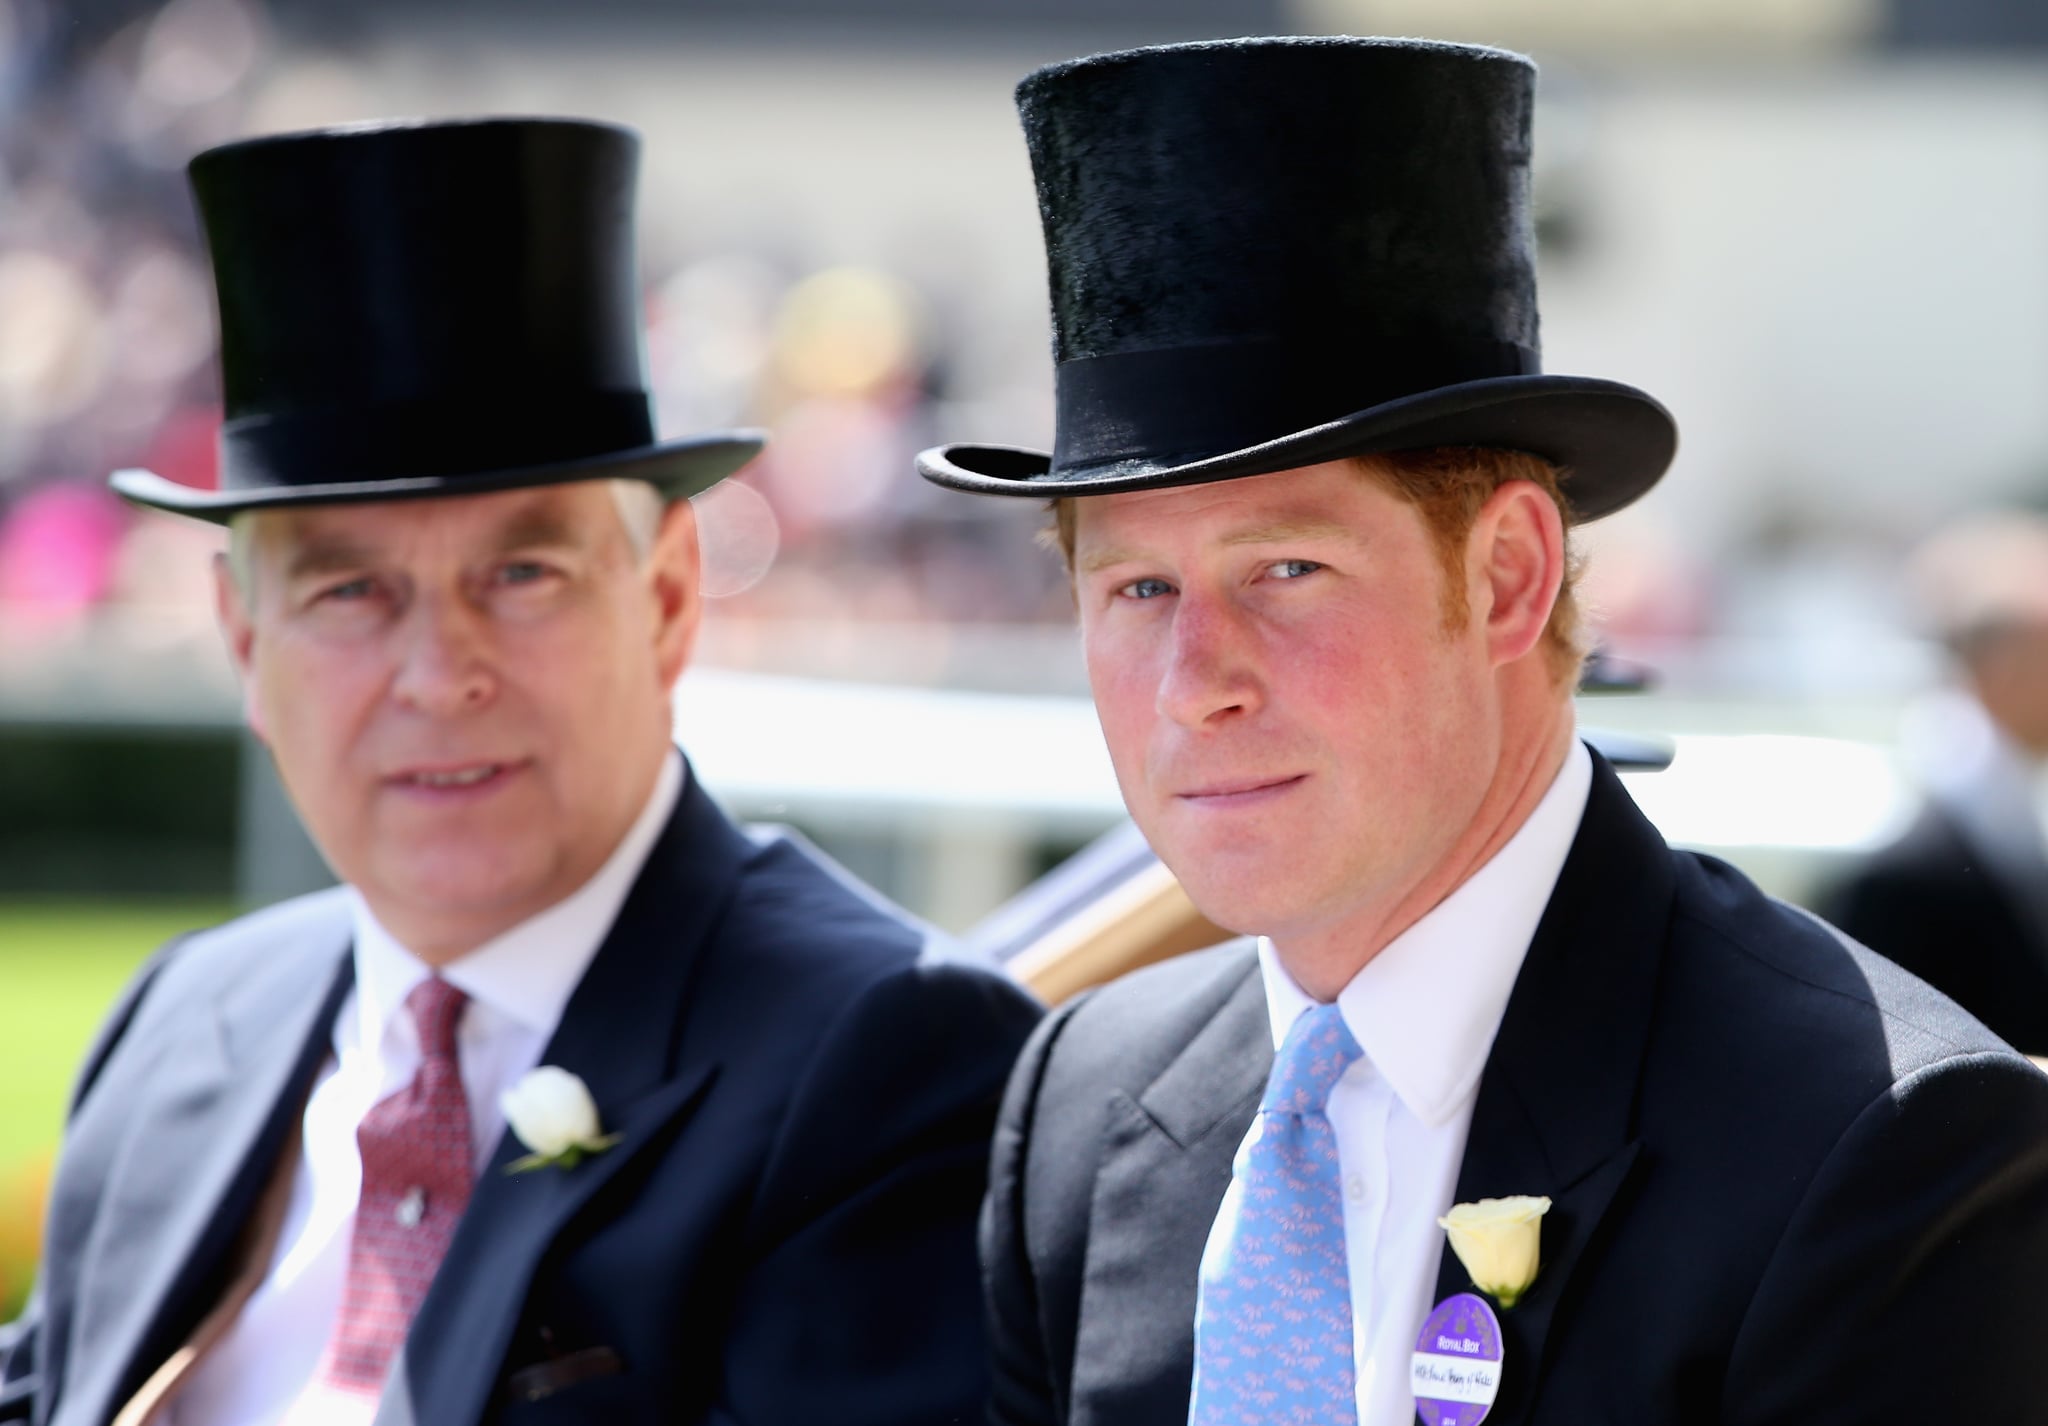 World News ASCOT, ENGLAND - JUNE 17:  (L-R) Prince Andrew, Duke of York and Prince Harry aid day regarded as one of Royal Ascot at Ascot Racecourse on June 17, 2014 in Ascot, England.  (Picture by Chris Jackson/Getty Photos for Ascot Racecourse)